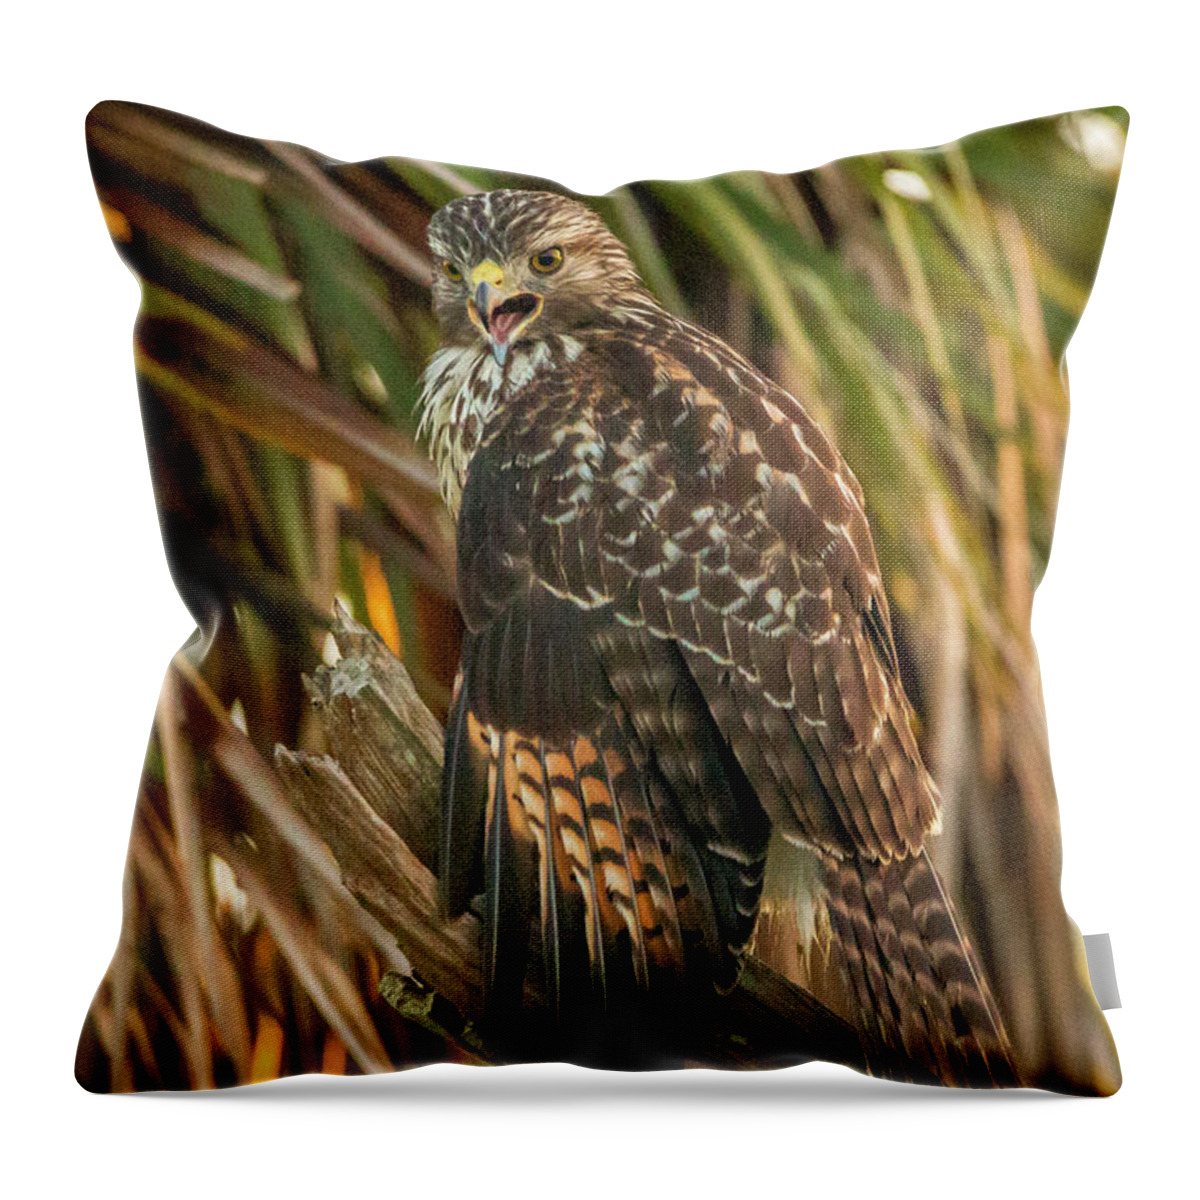 Hawk Throw Pillow featuring the photograph Squawk Hawk by Tom Claud